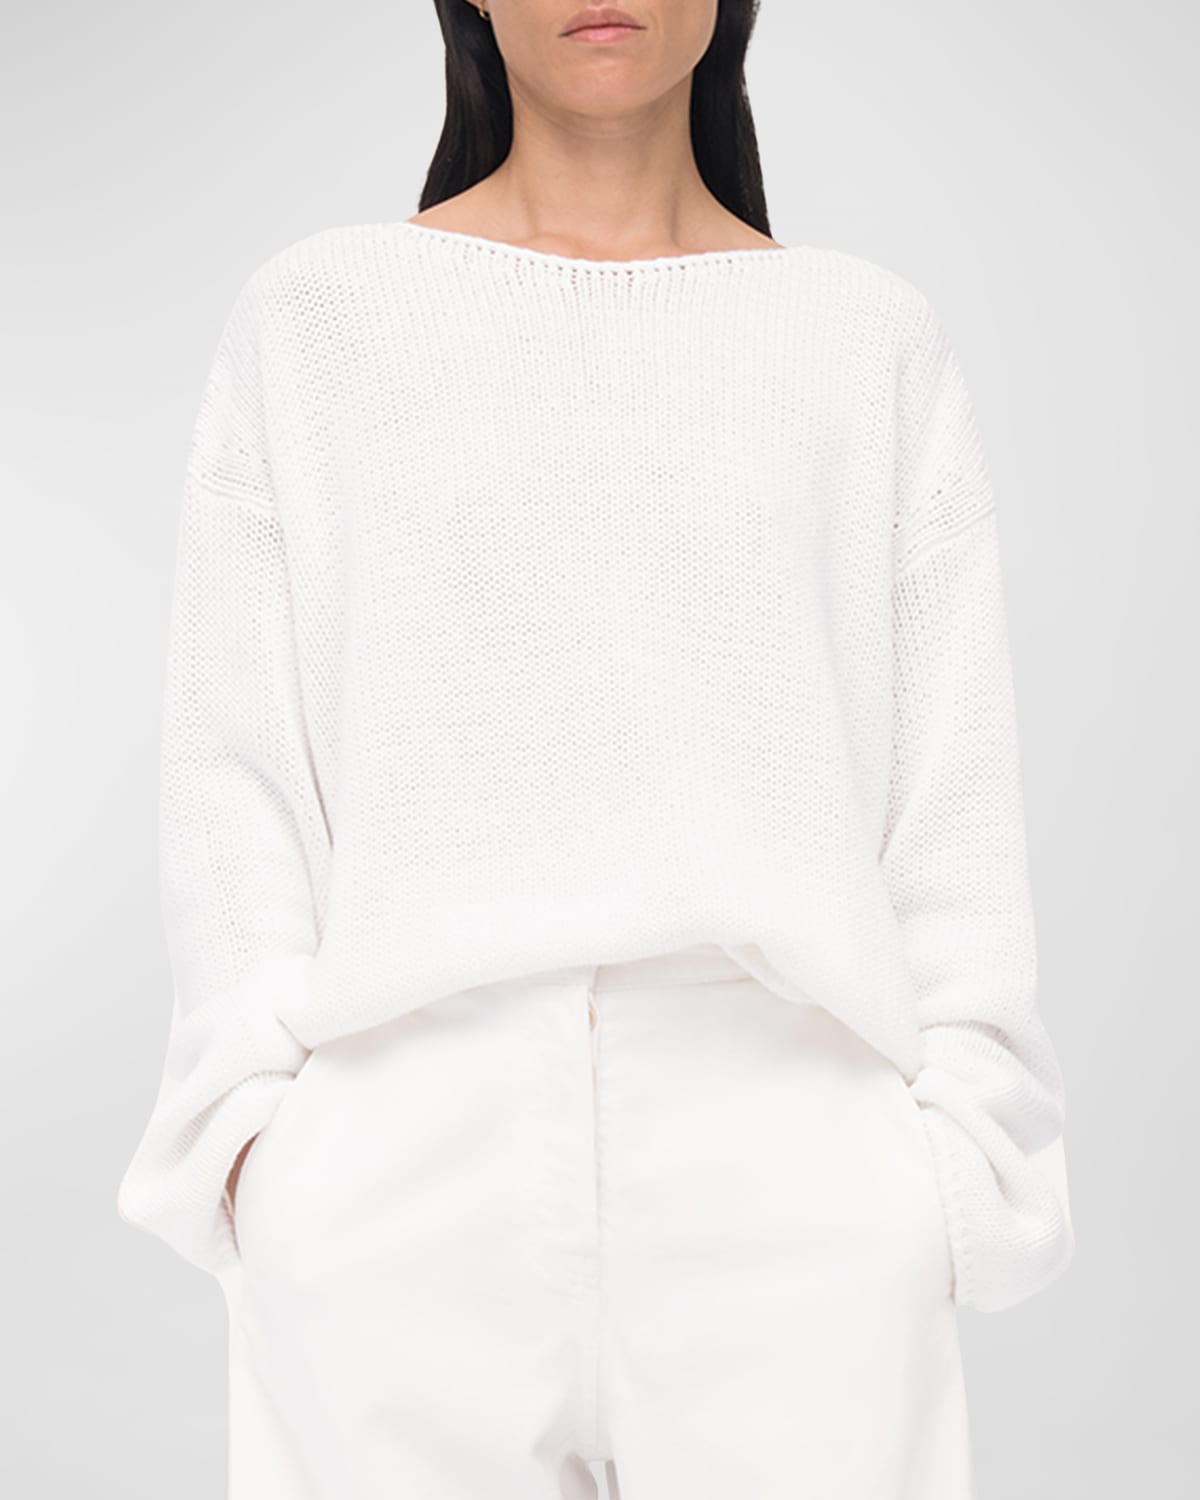 Another Tomorrow Draped Knit Jumper In White